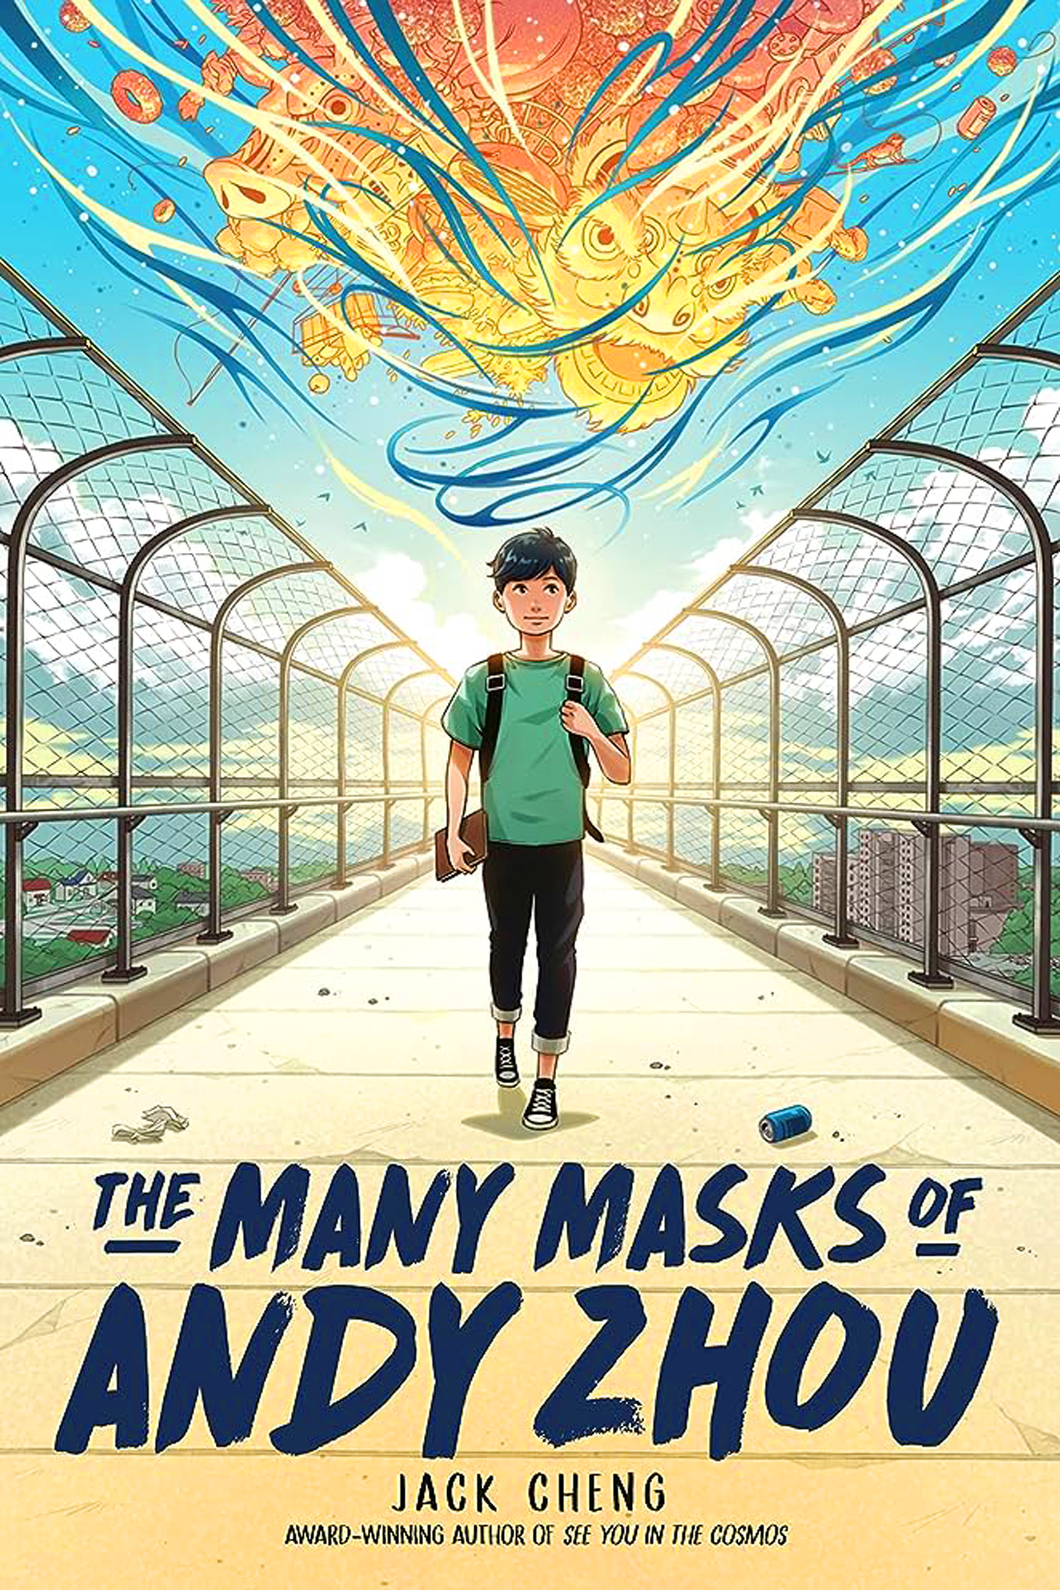 The Many Masks of Andy Zhou by Jack Cheng / Hardcover - NEW BOOK